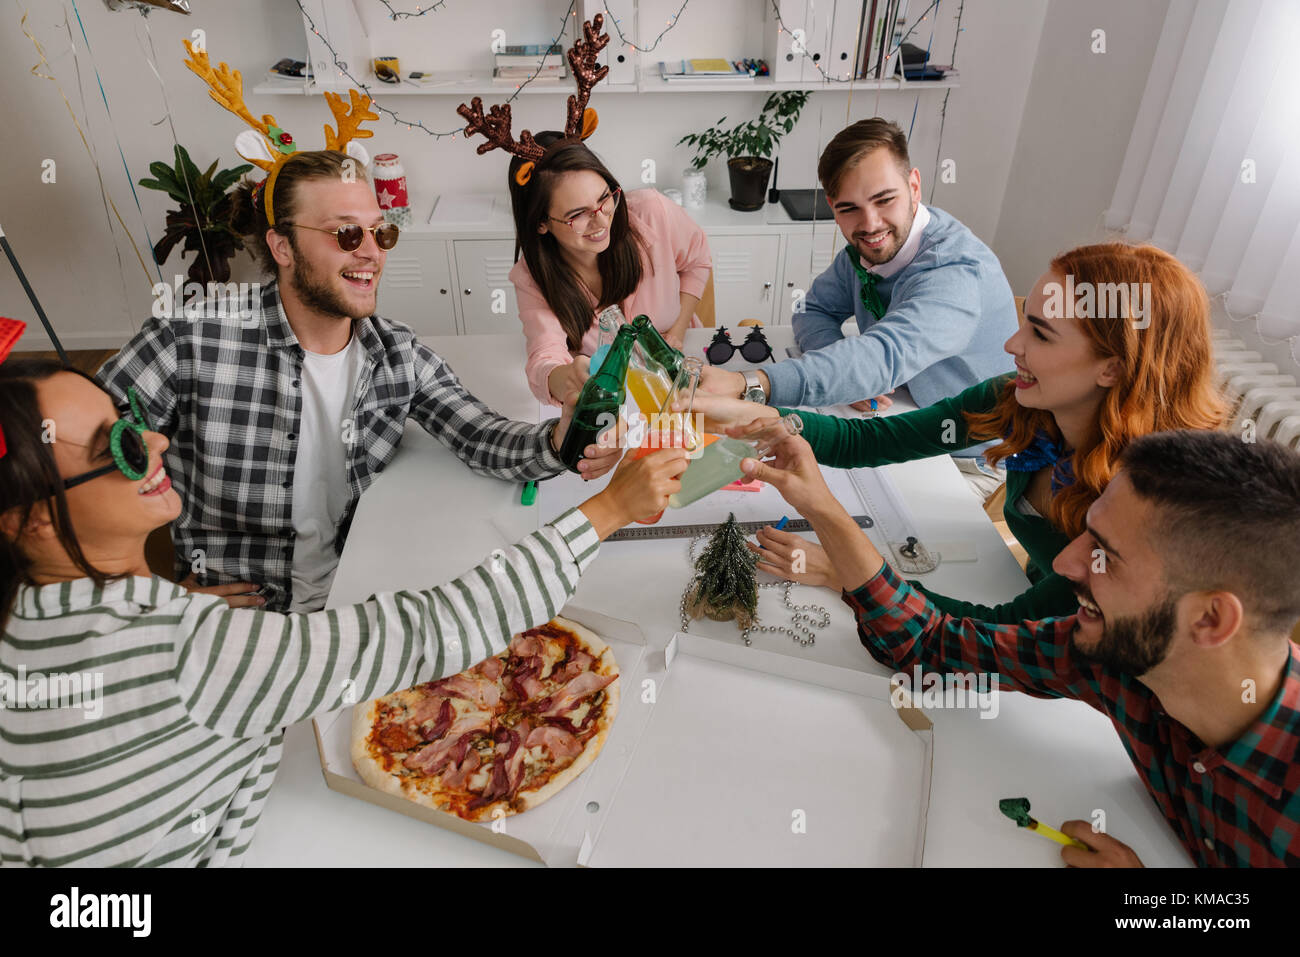 Young coworkers toasting together Stock Photo